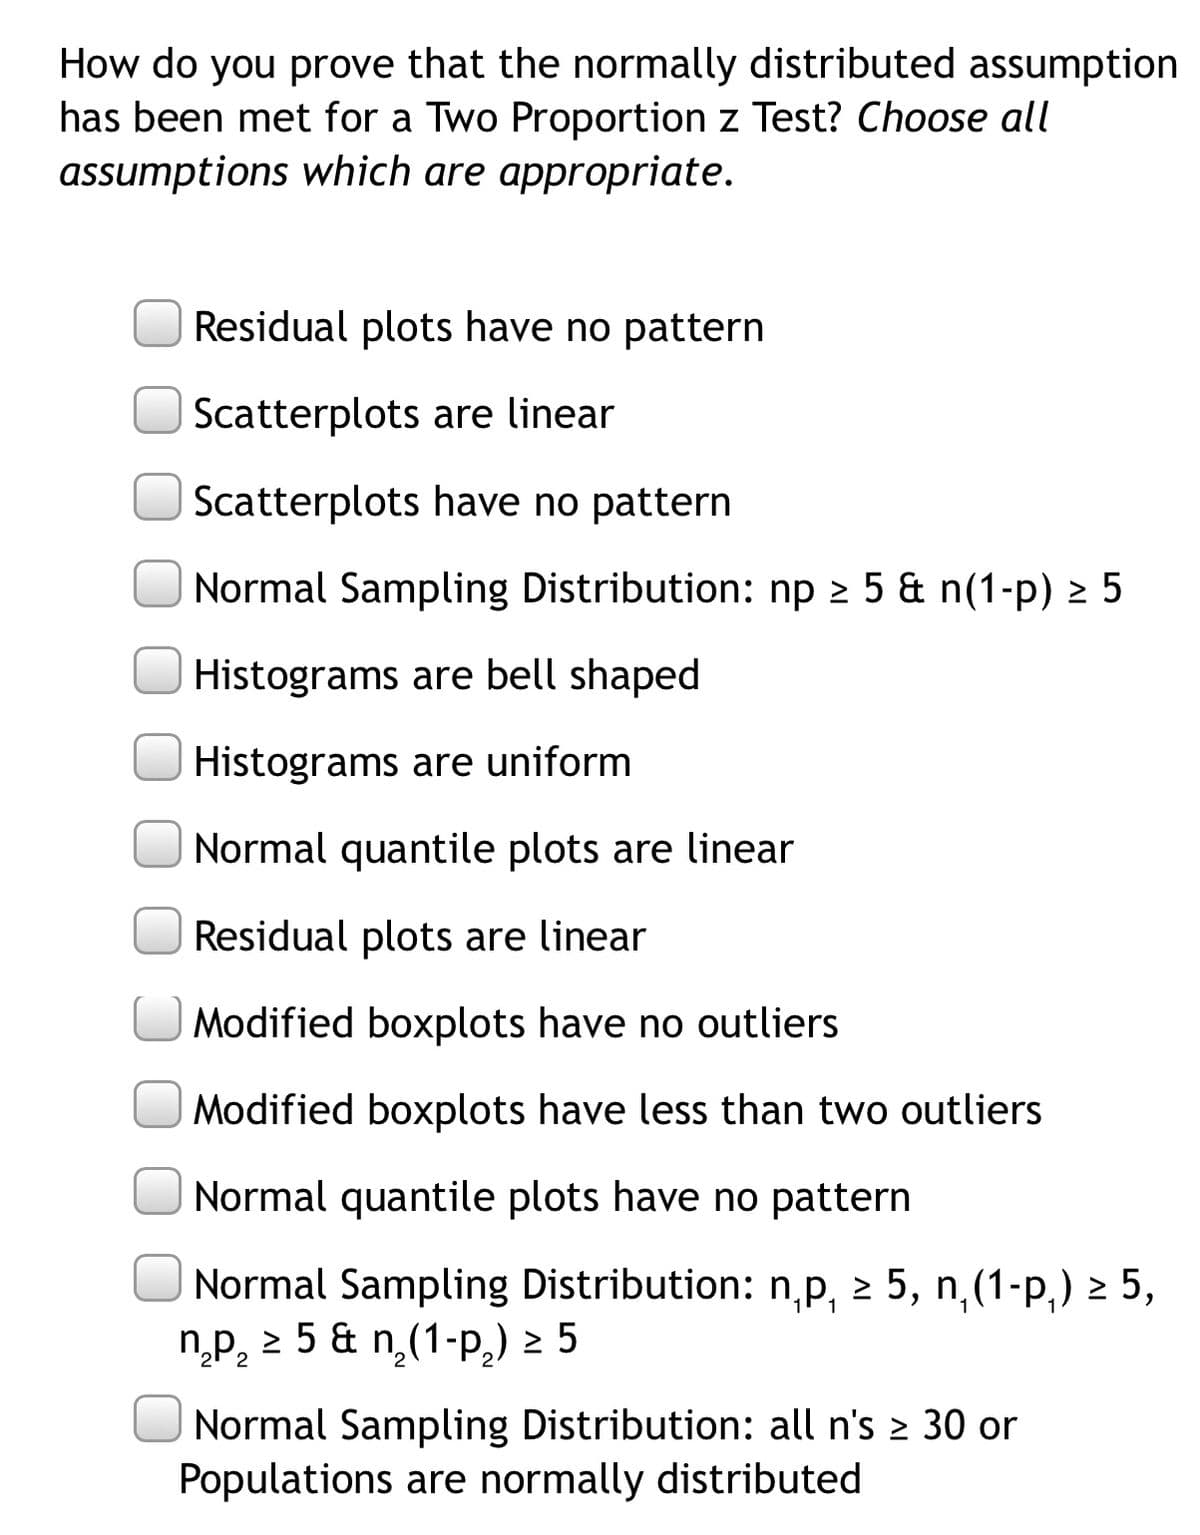 How do you prove that the normally distributed assumption
has been met for a Two Proportion z Test? Choose all
assumptions which are appropriate.
Residual plots have no pattern
Scatterplots are linear
Scatterplots have no pattern
Normal Sampling Distribution: np 2 5 & n(1-p) > 5
Histograms are bell shaped
Histograms are uniform
Normal quantile plots are linear
Residual plots are linear
O Modified boxplots have no outliers
Modified boxplots have less than two outliers
Normal quantile plots have no pattern
Normal Sampling Distribution: np, 2 5, n,(1-p,) > 5,
np, 2 5 & n,(1-p,) 2 5
Normal Sampling Distribution: all n's 2 30 or
Populations are normally distributed
